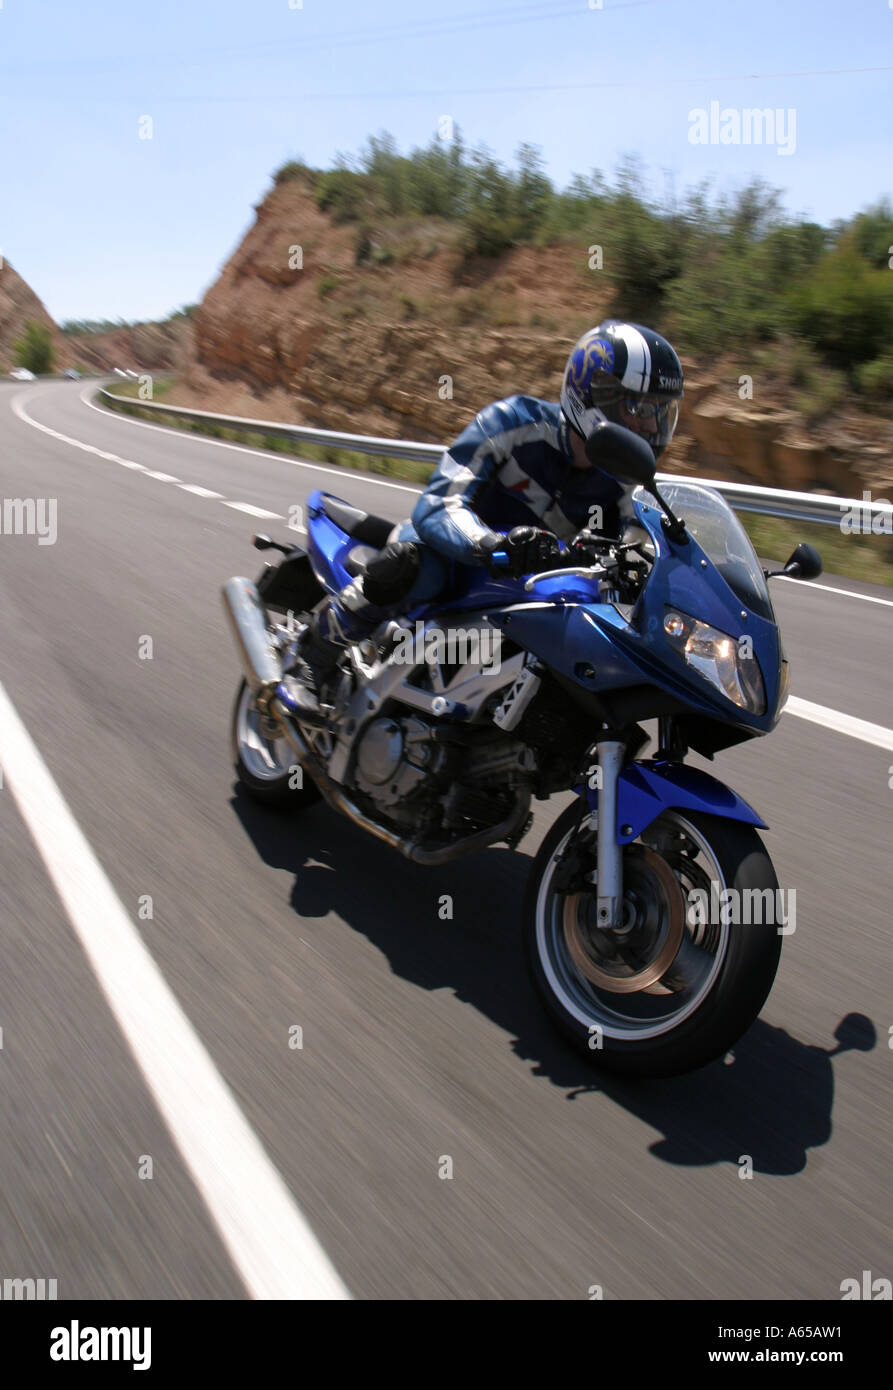 A motorist travels at high speed on an empty road. Spain, 2006. Stock Photo